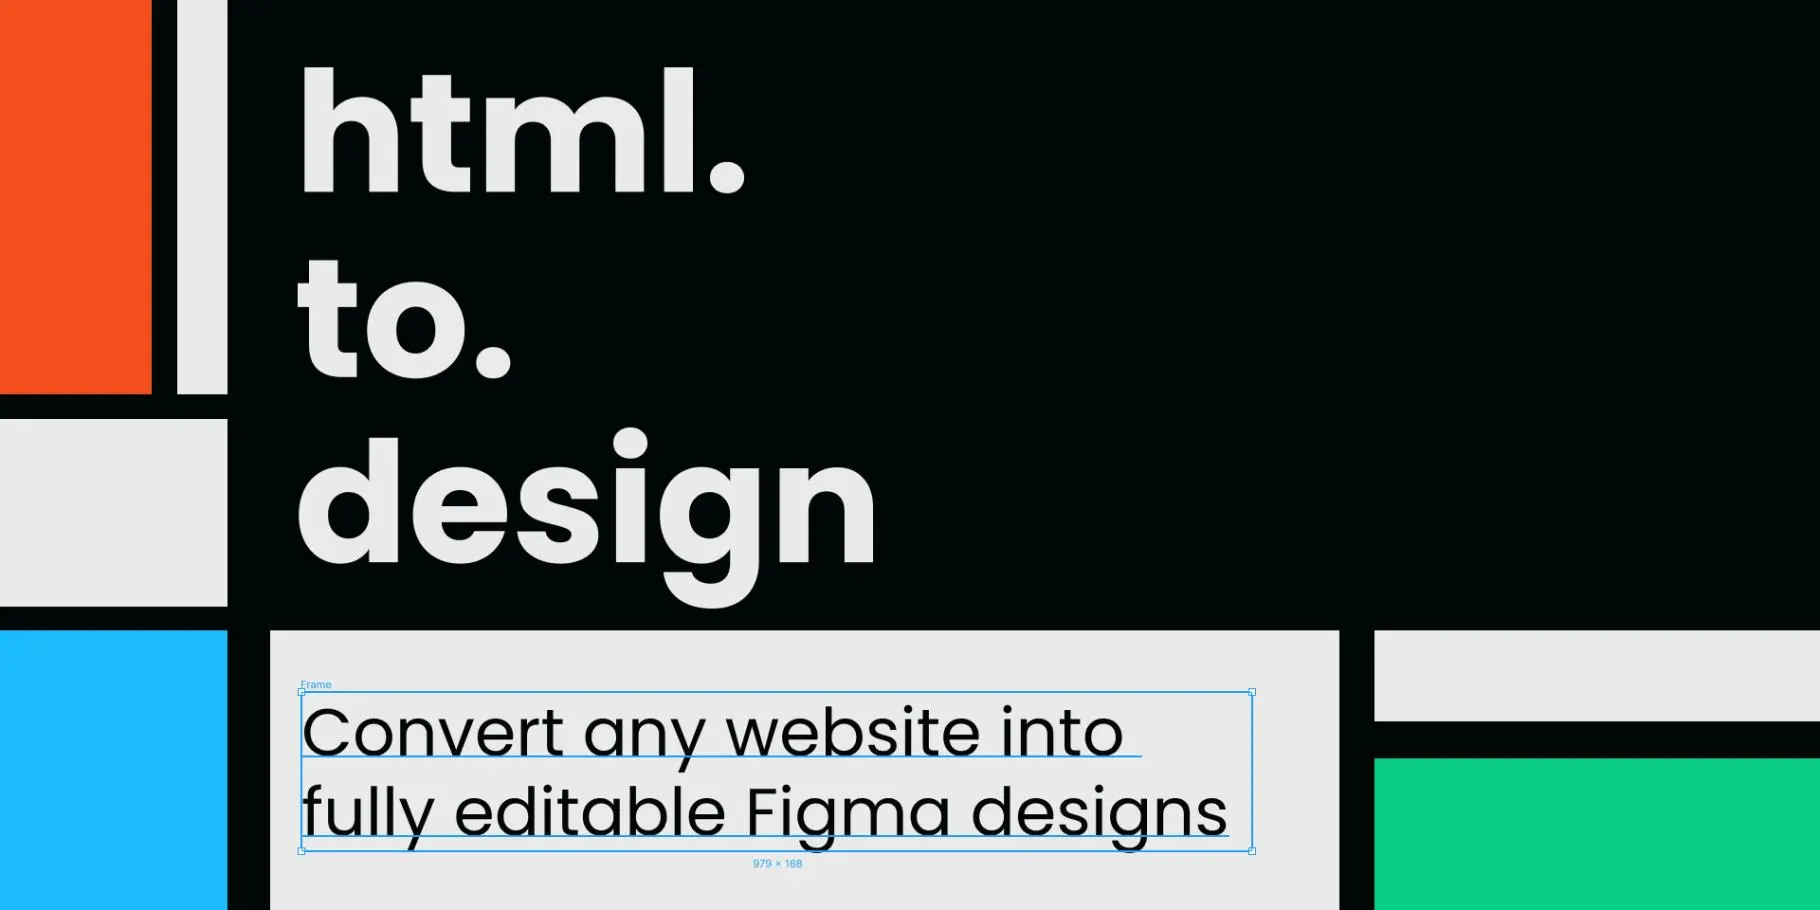 html.to.design logo over Figma text element stating "Convert any website into fully editable Figma designs"